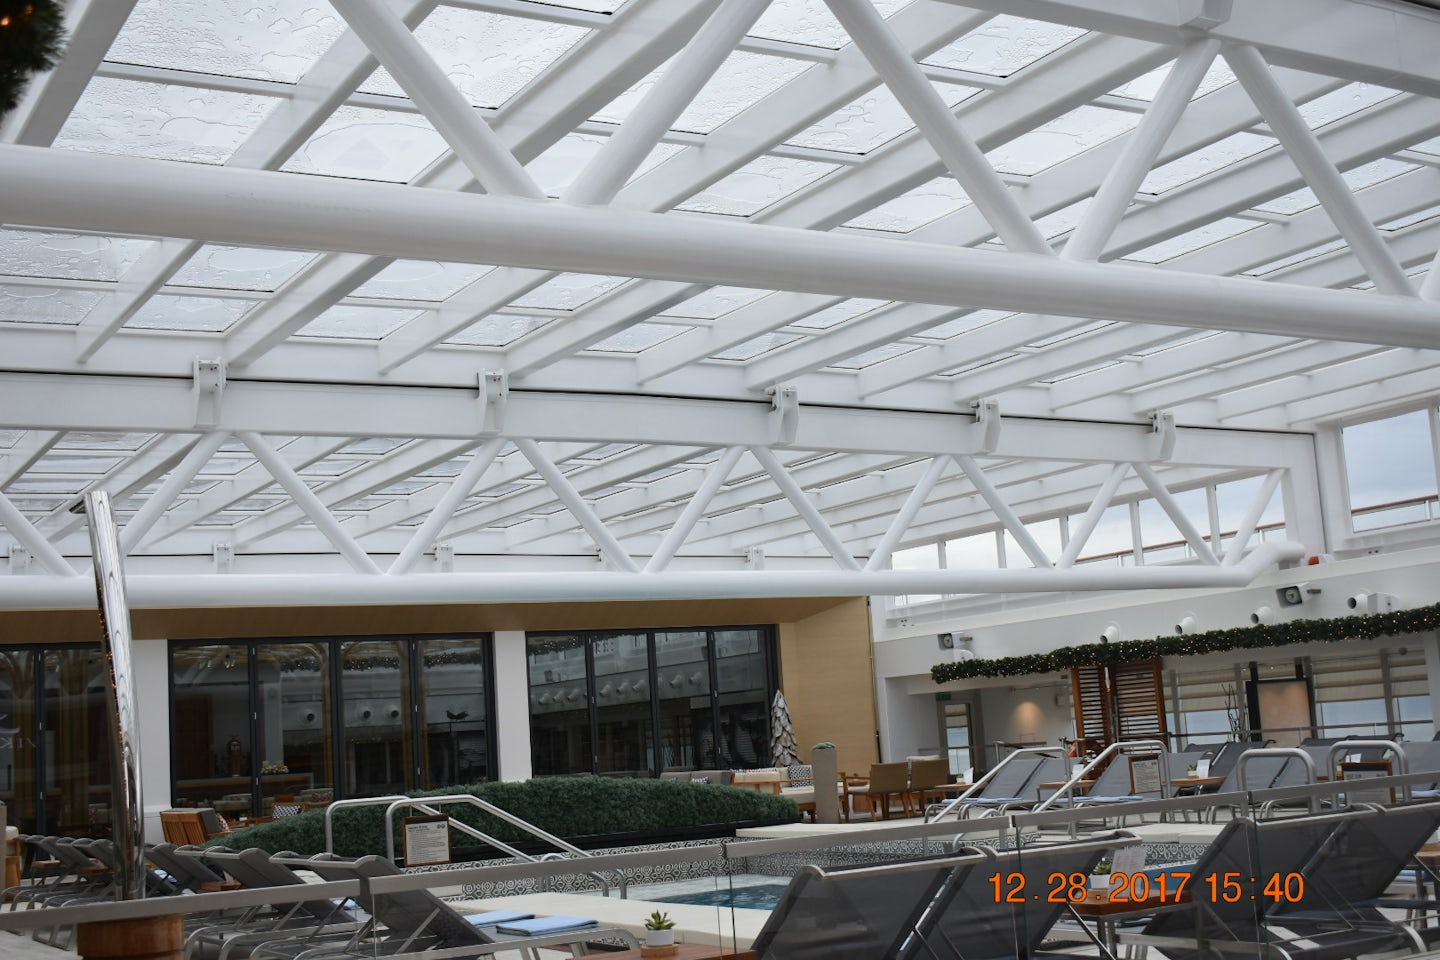 Viking Sky pool area with indoor cover in place